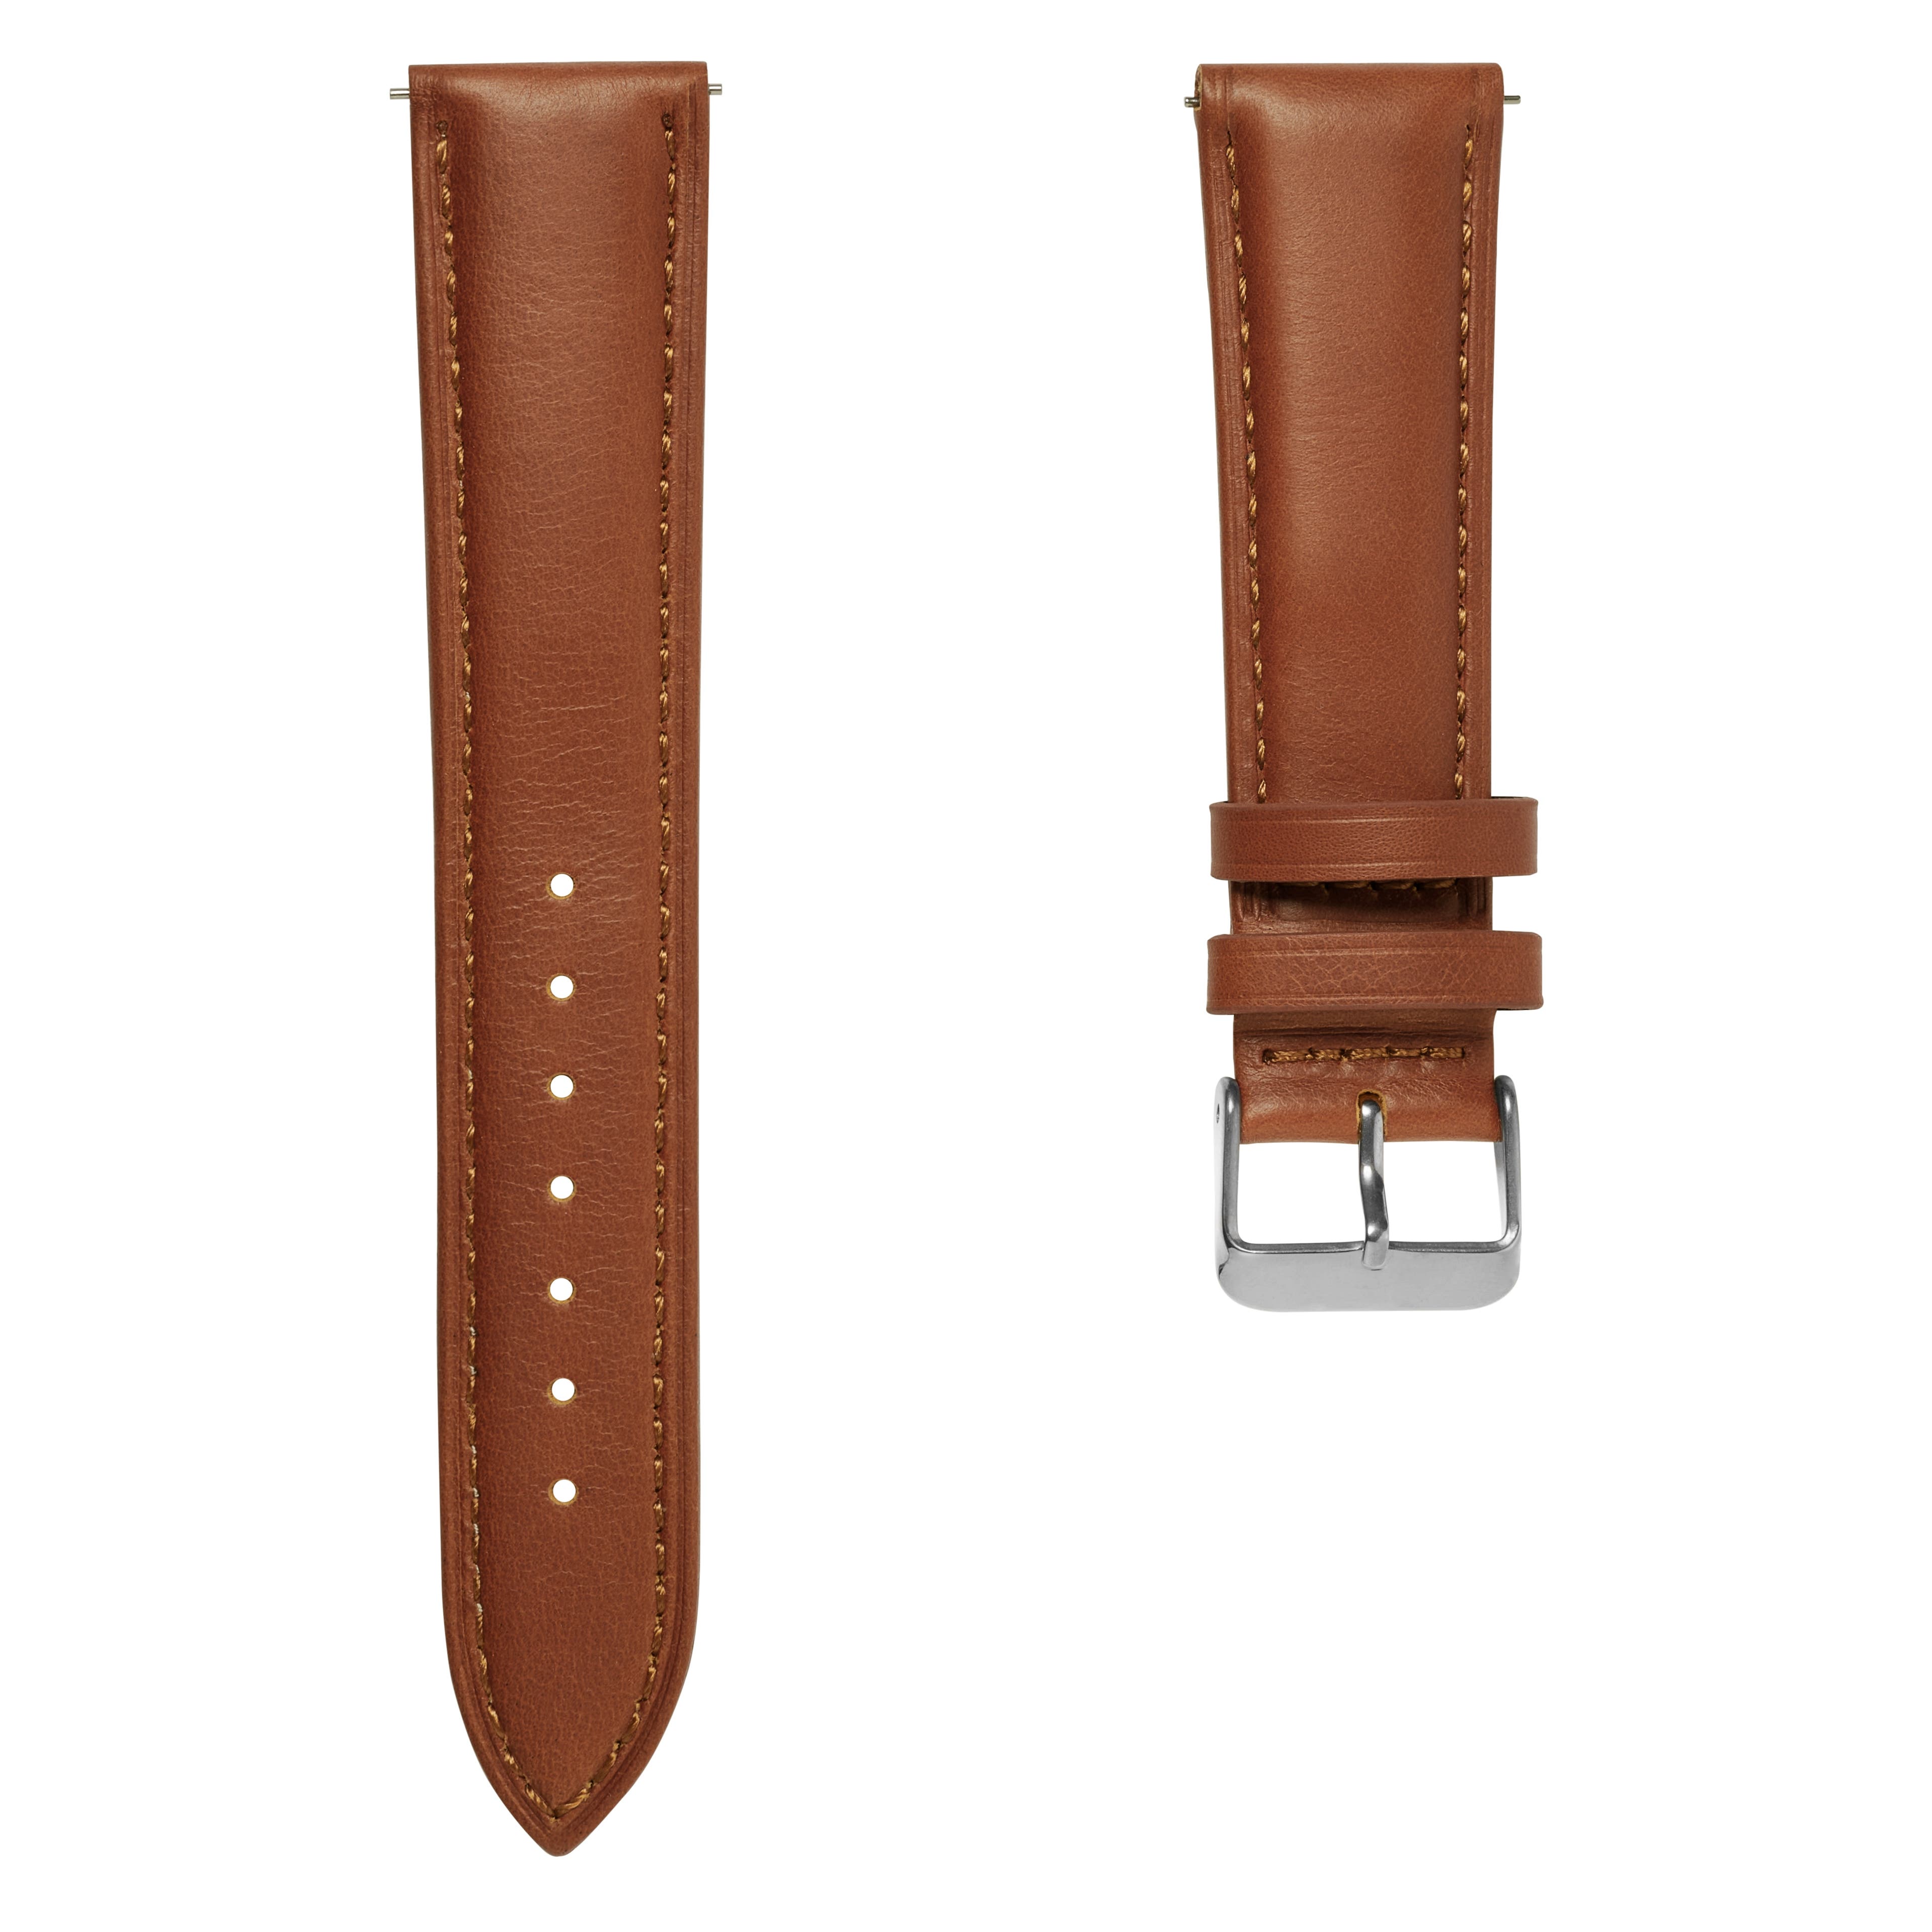 18mm Tan Leather Watch Strap with Silver-Tone Buckle – Quick Release